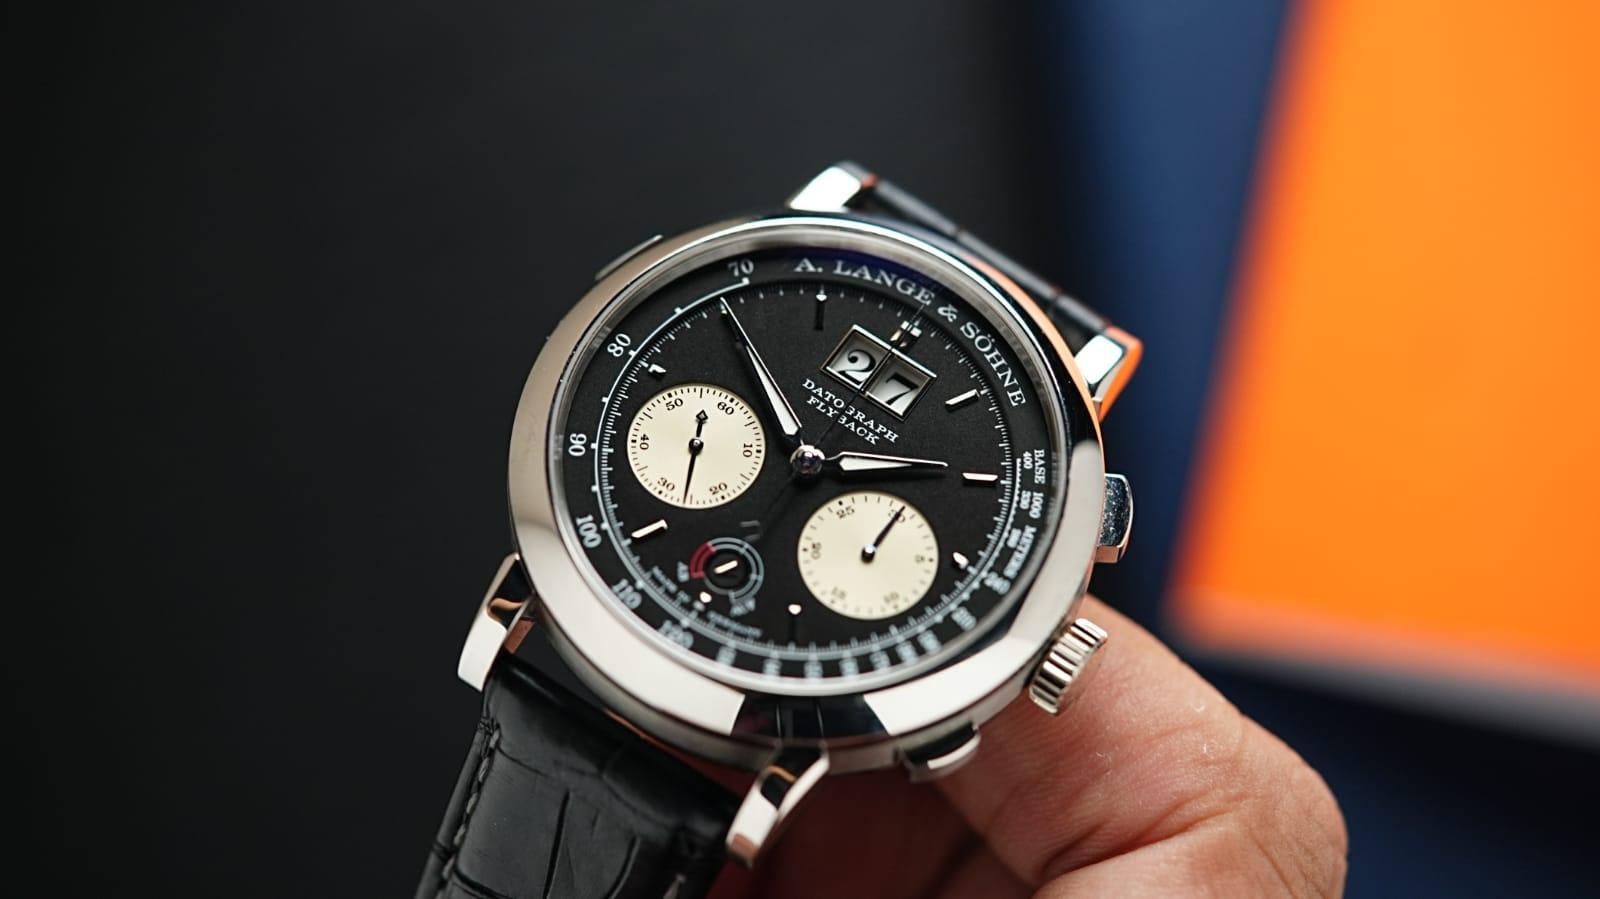 A. Lange & Söhne Datograph Platinum 405.035 displayed in hand.